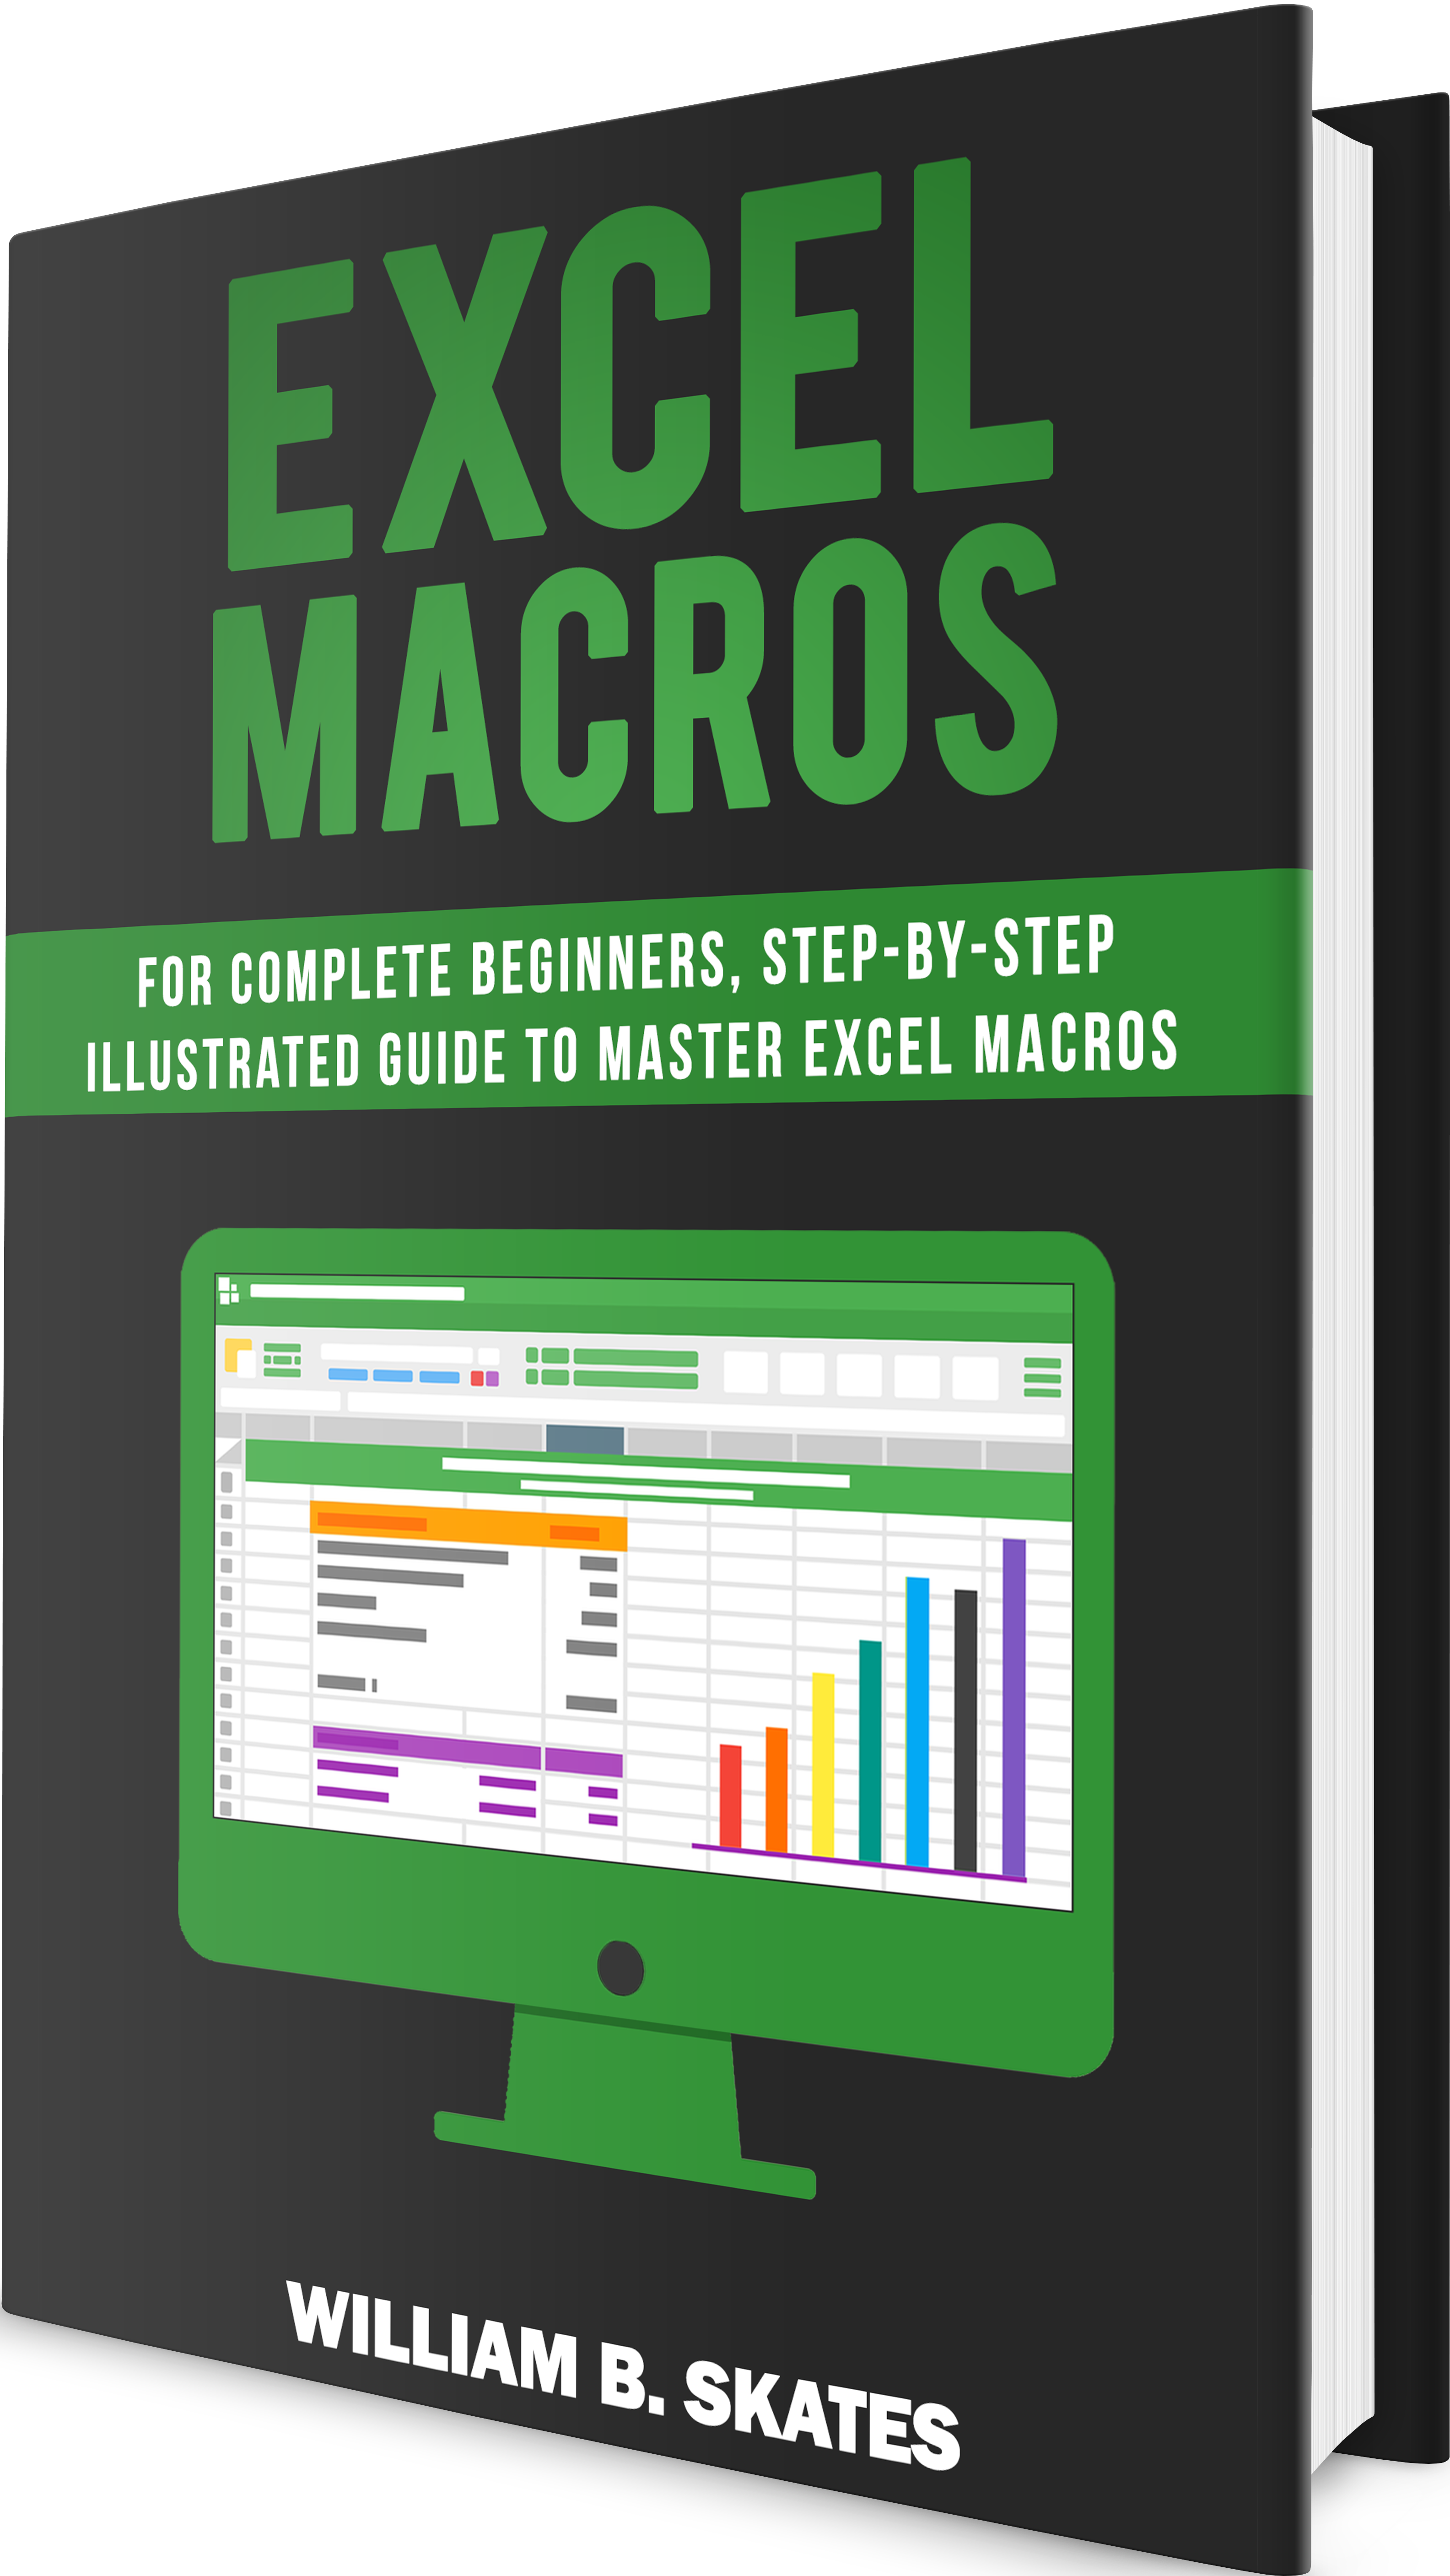 FREE: Excel Macros: For Complete Beginners, Step-By-Step Illustrated Guide to Master Excel Macros by William B. Skates